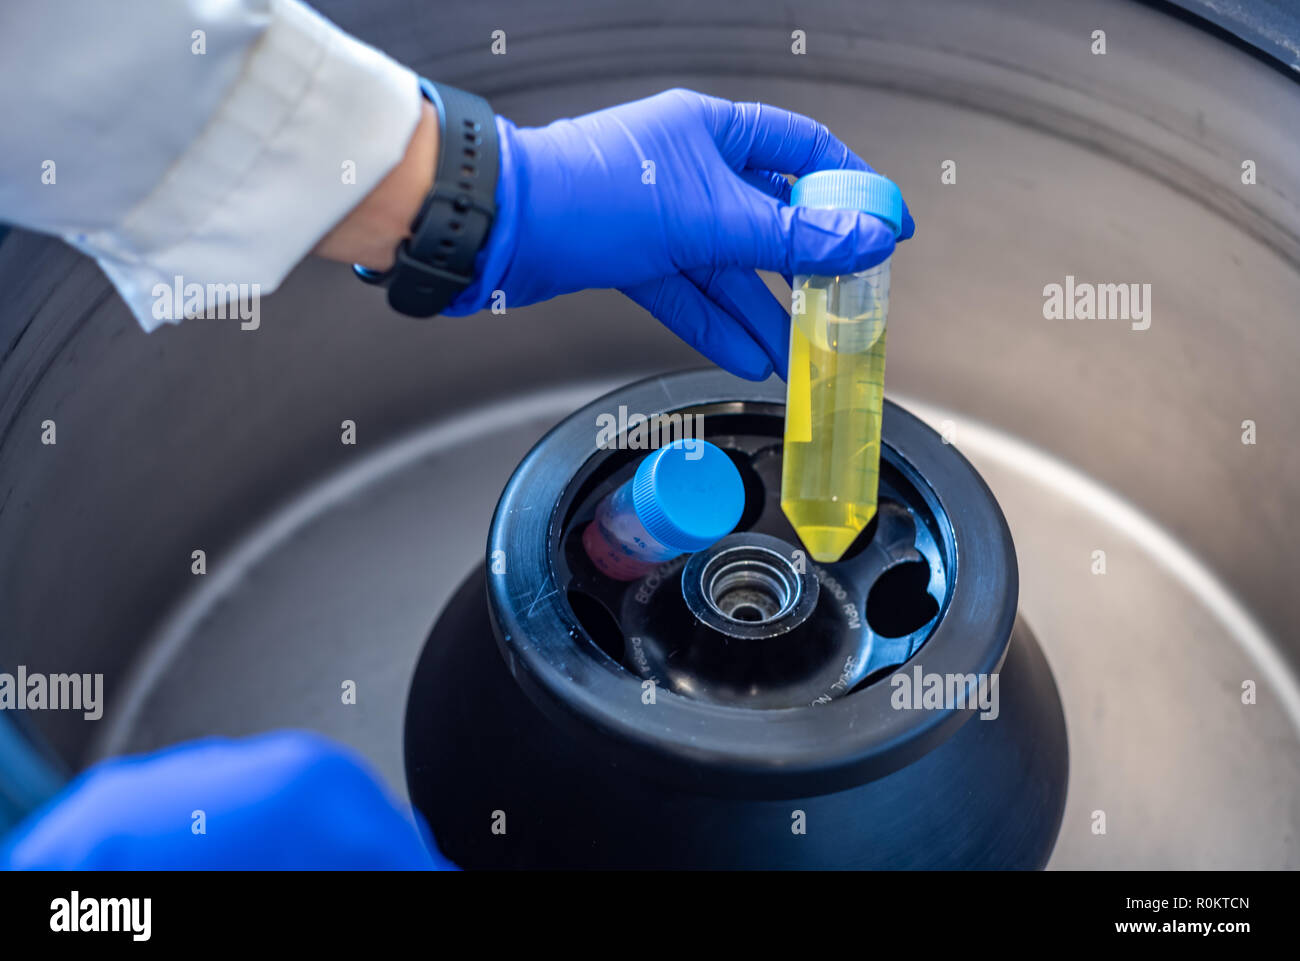 Centrifugation of biological samples in biomedical laboratory Stock Photo